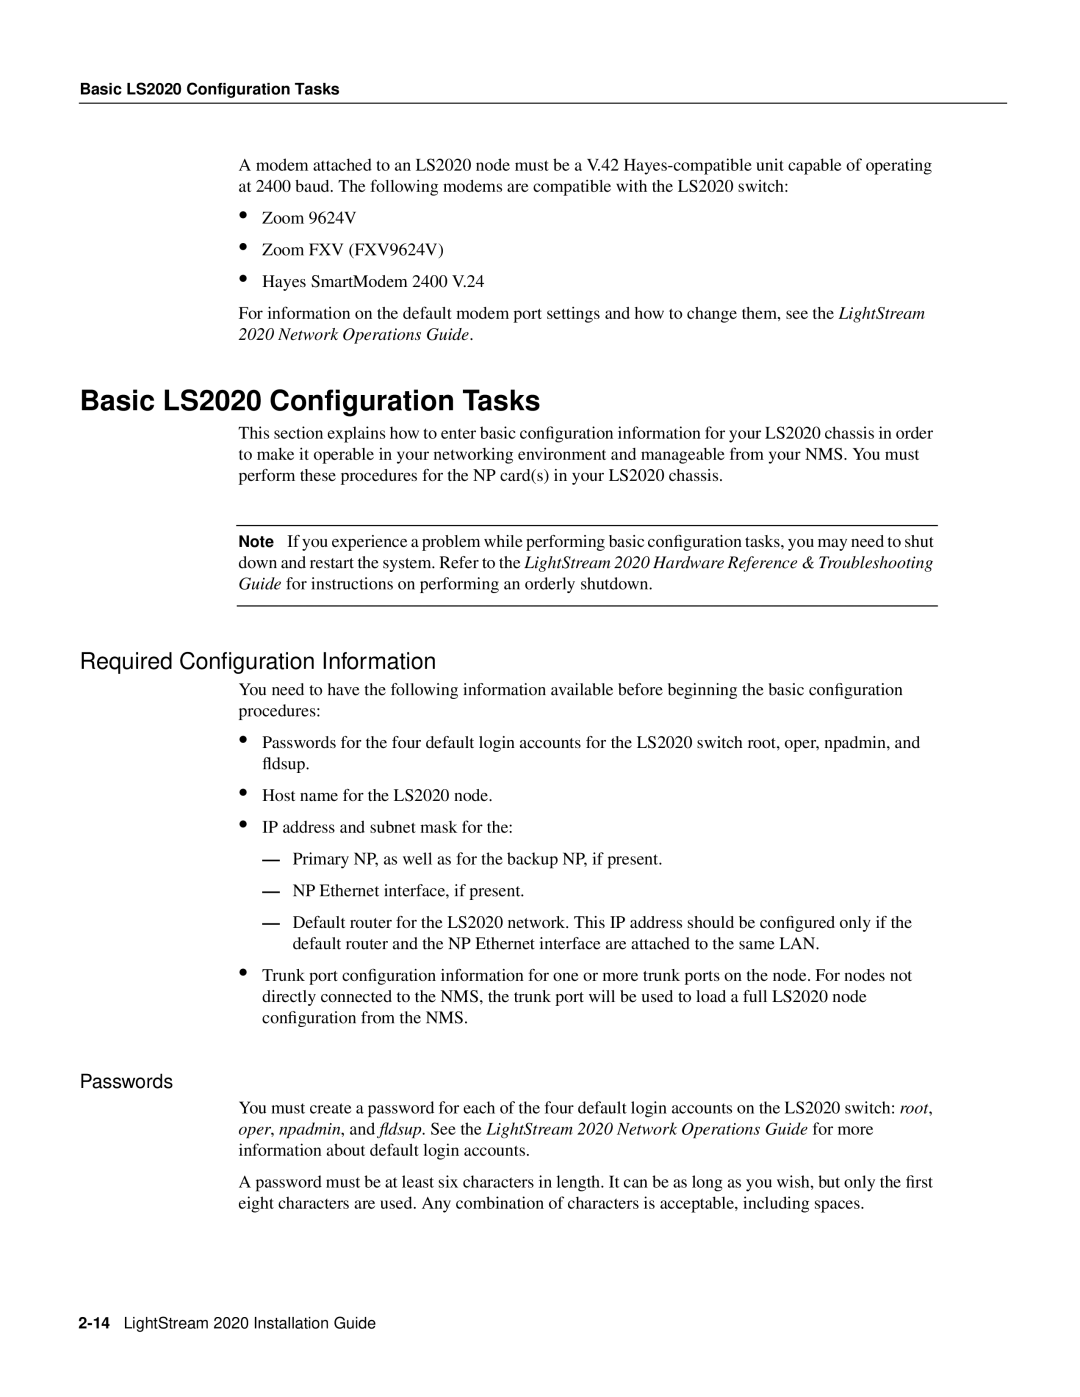 Cisco Systems manual Basic LS2020 Conﬁguration Tasks, Required Conﬁguration Information, Passwords 